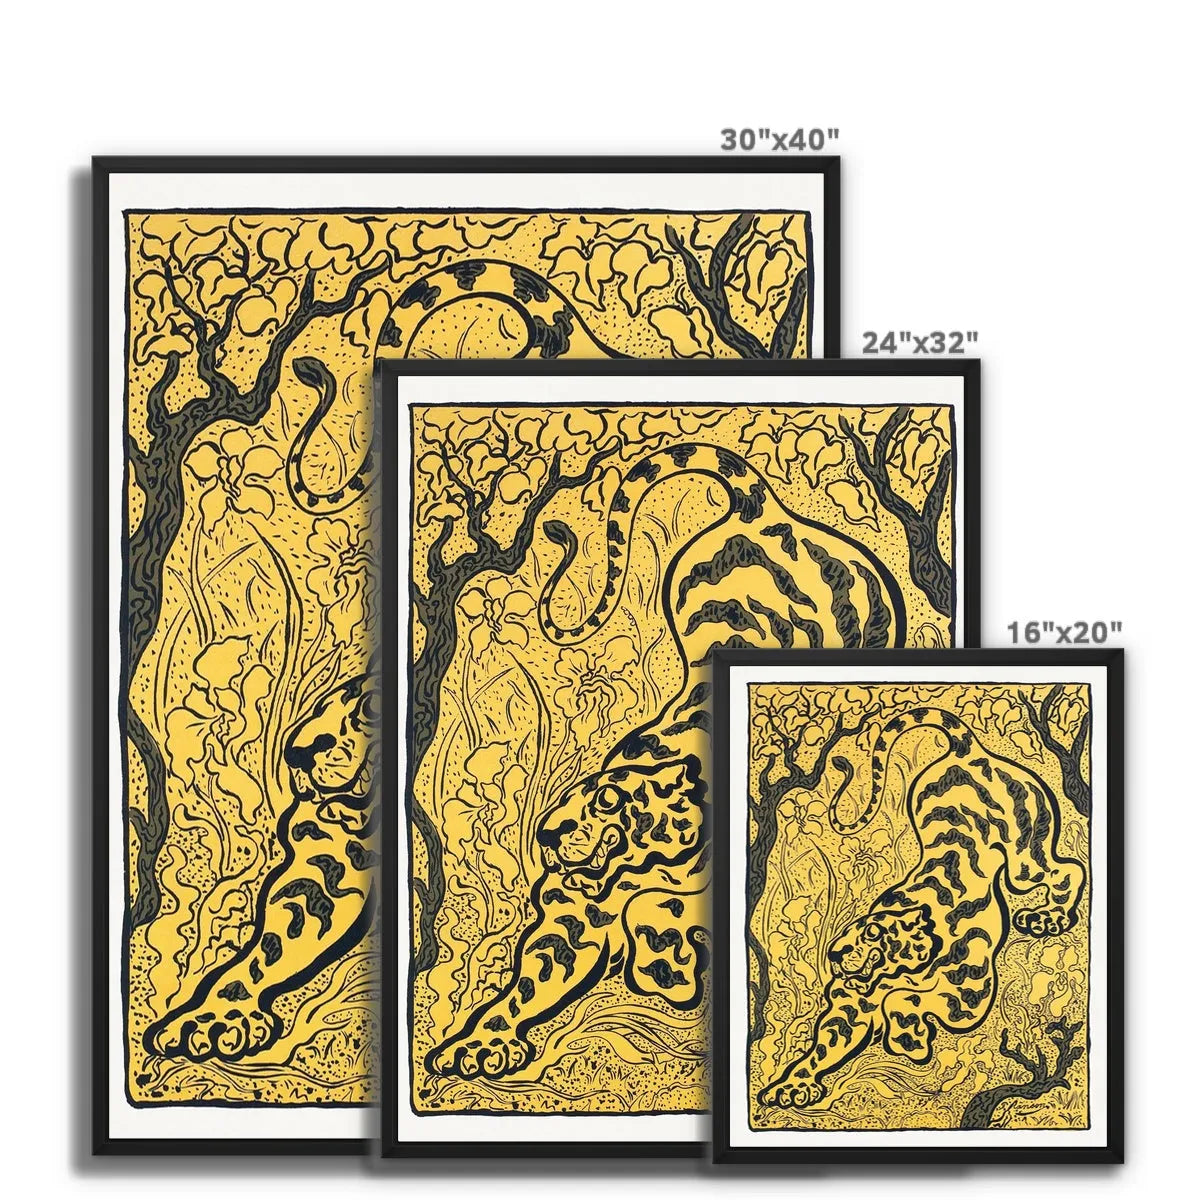 Tiger In The Jungle By Paul Ranson Framed Canvas - Posters Prints & Visual Artwork - Aesthetic Art